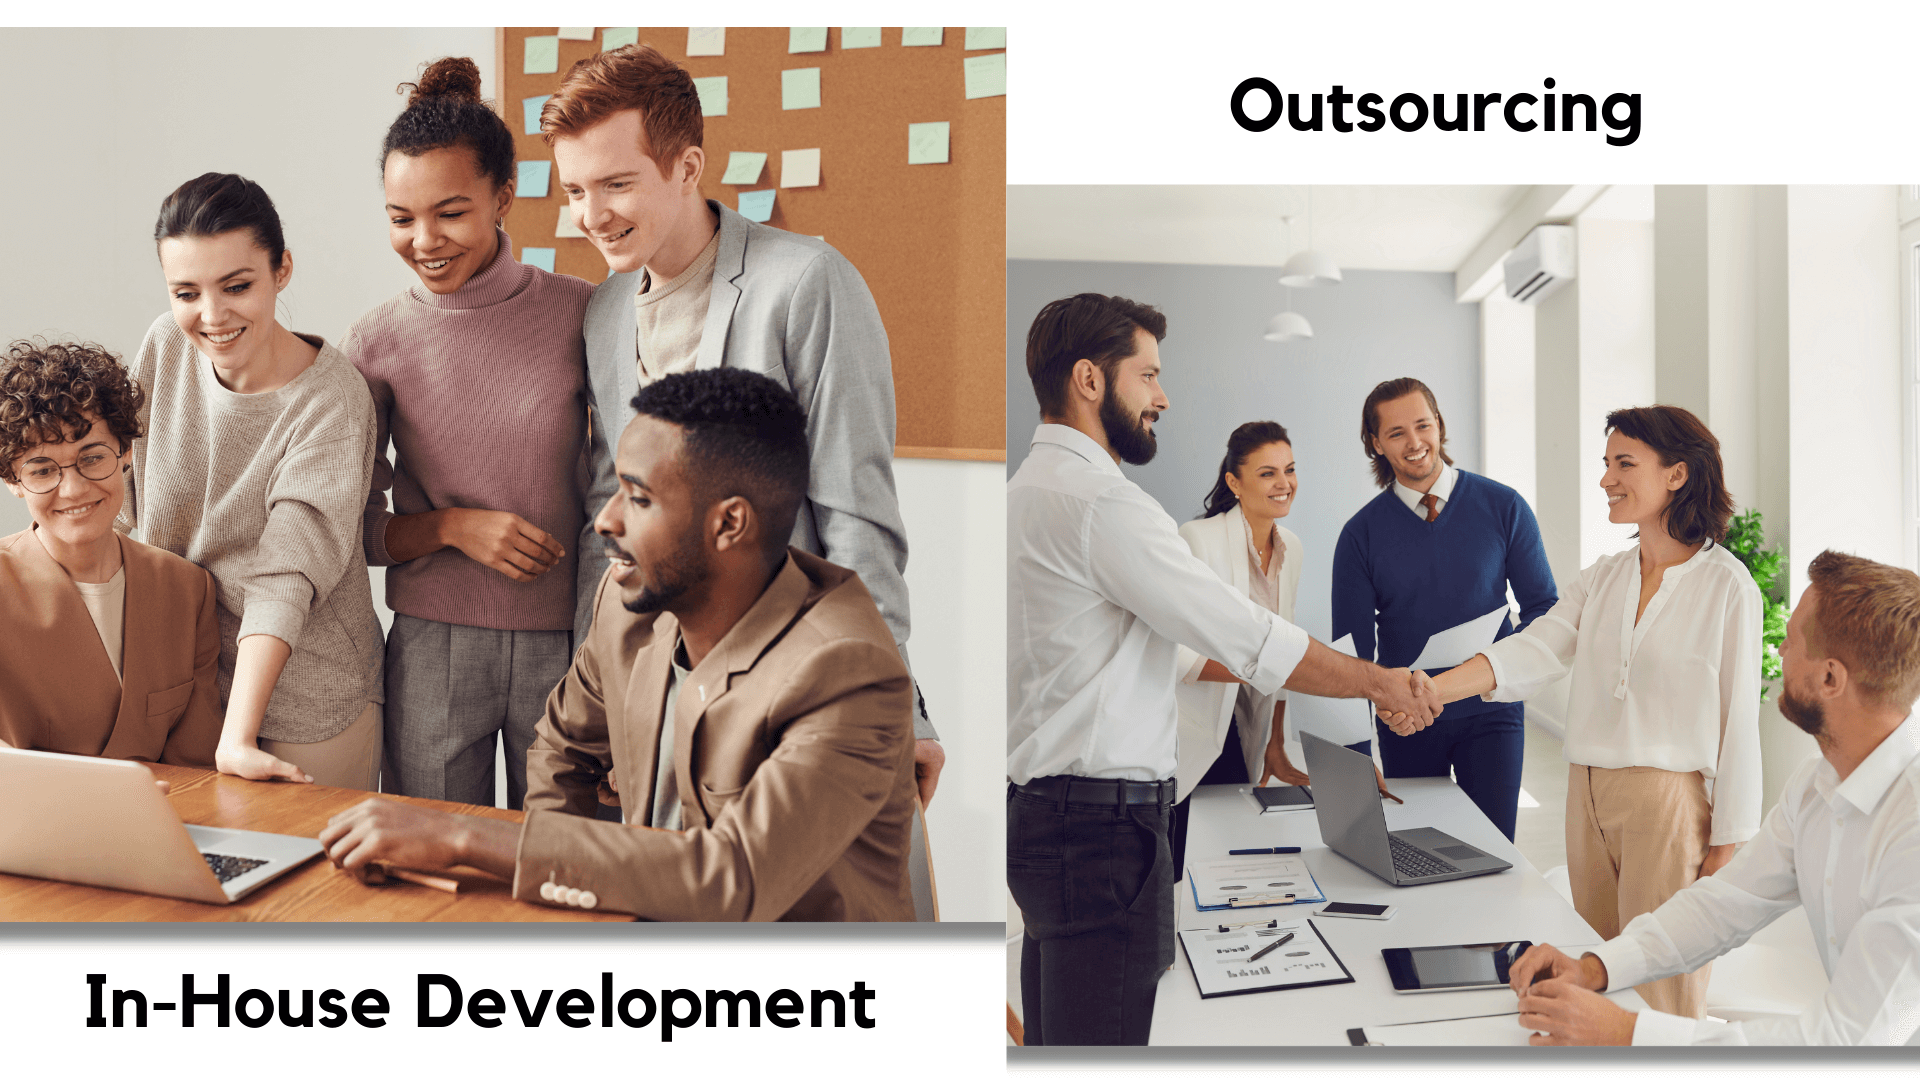 In-House vs Outsourcing